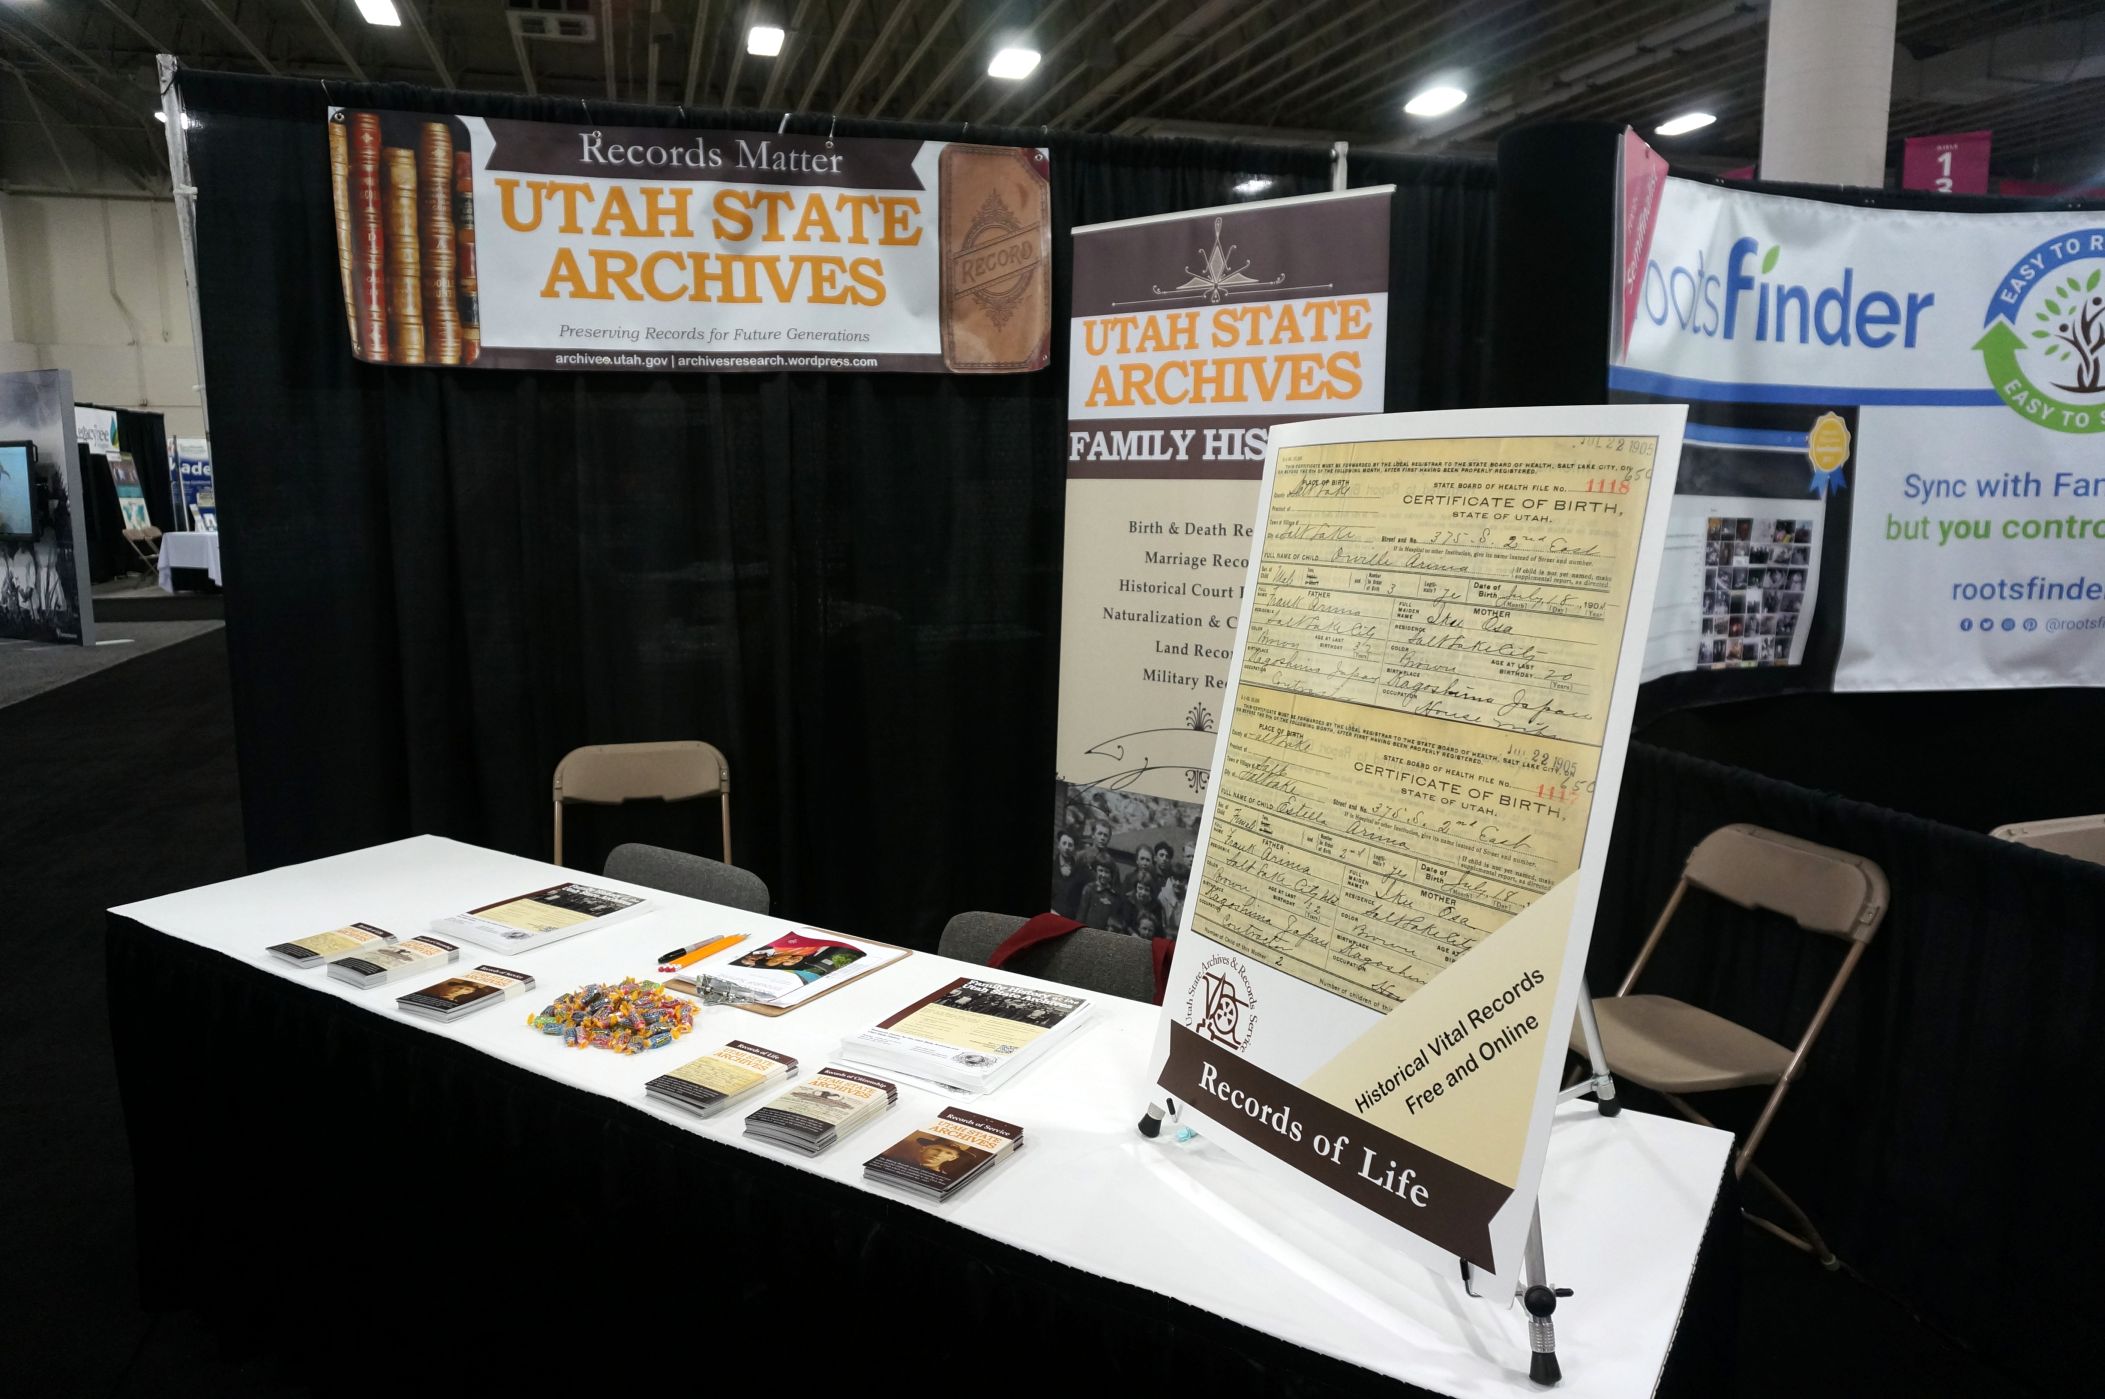 Utah State Archives booth at RootsTech 2017